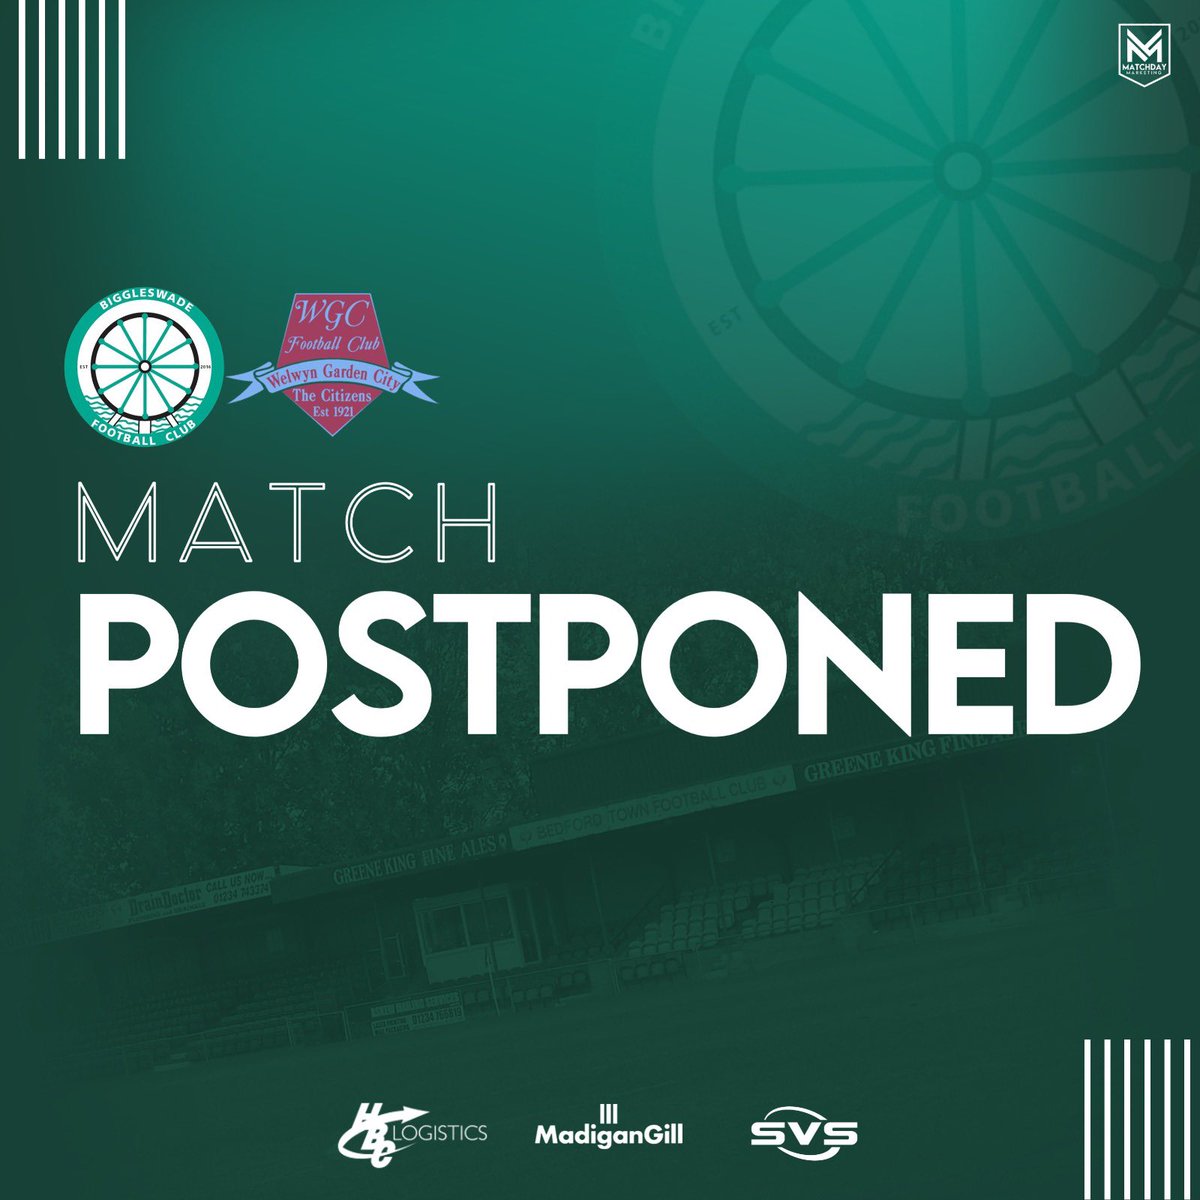 MATCH OFF | 💚⚽️❌ Due a waterlogged pitch & flooding in areas surrounding The Eyrie tomorrow’s scheduled fixture with @WGCFC is postponed. A new date will follow. Thank you to the Southern League & Welwyn Garden City for their support of an early decision on this 👏 #WeAreFC